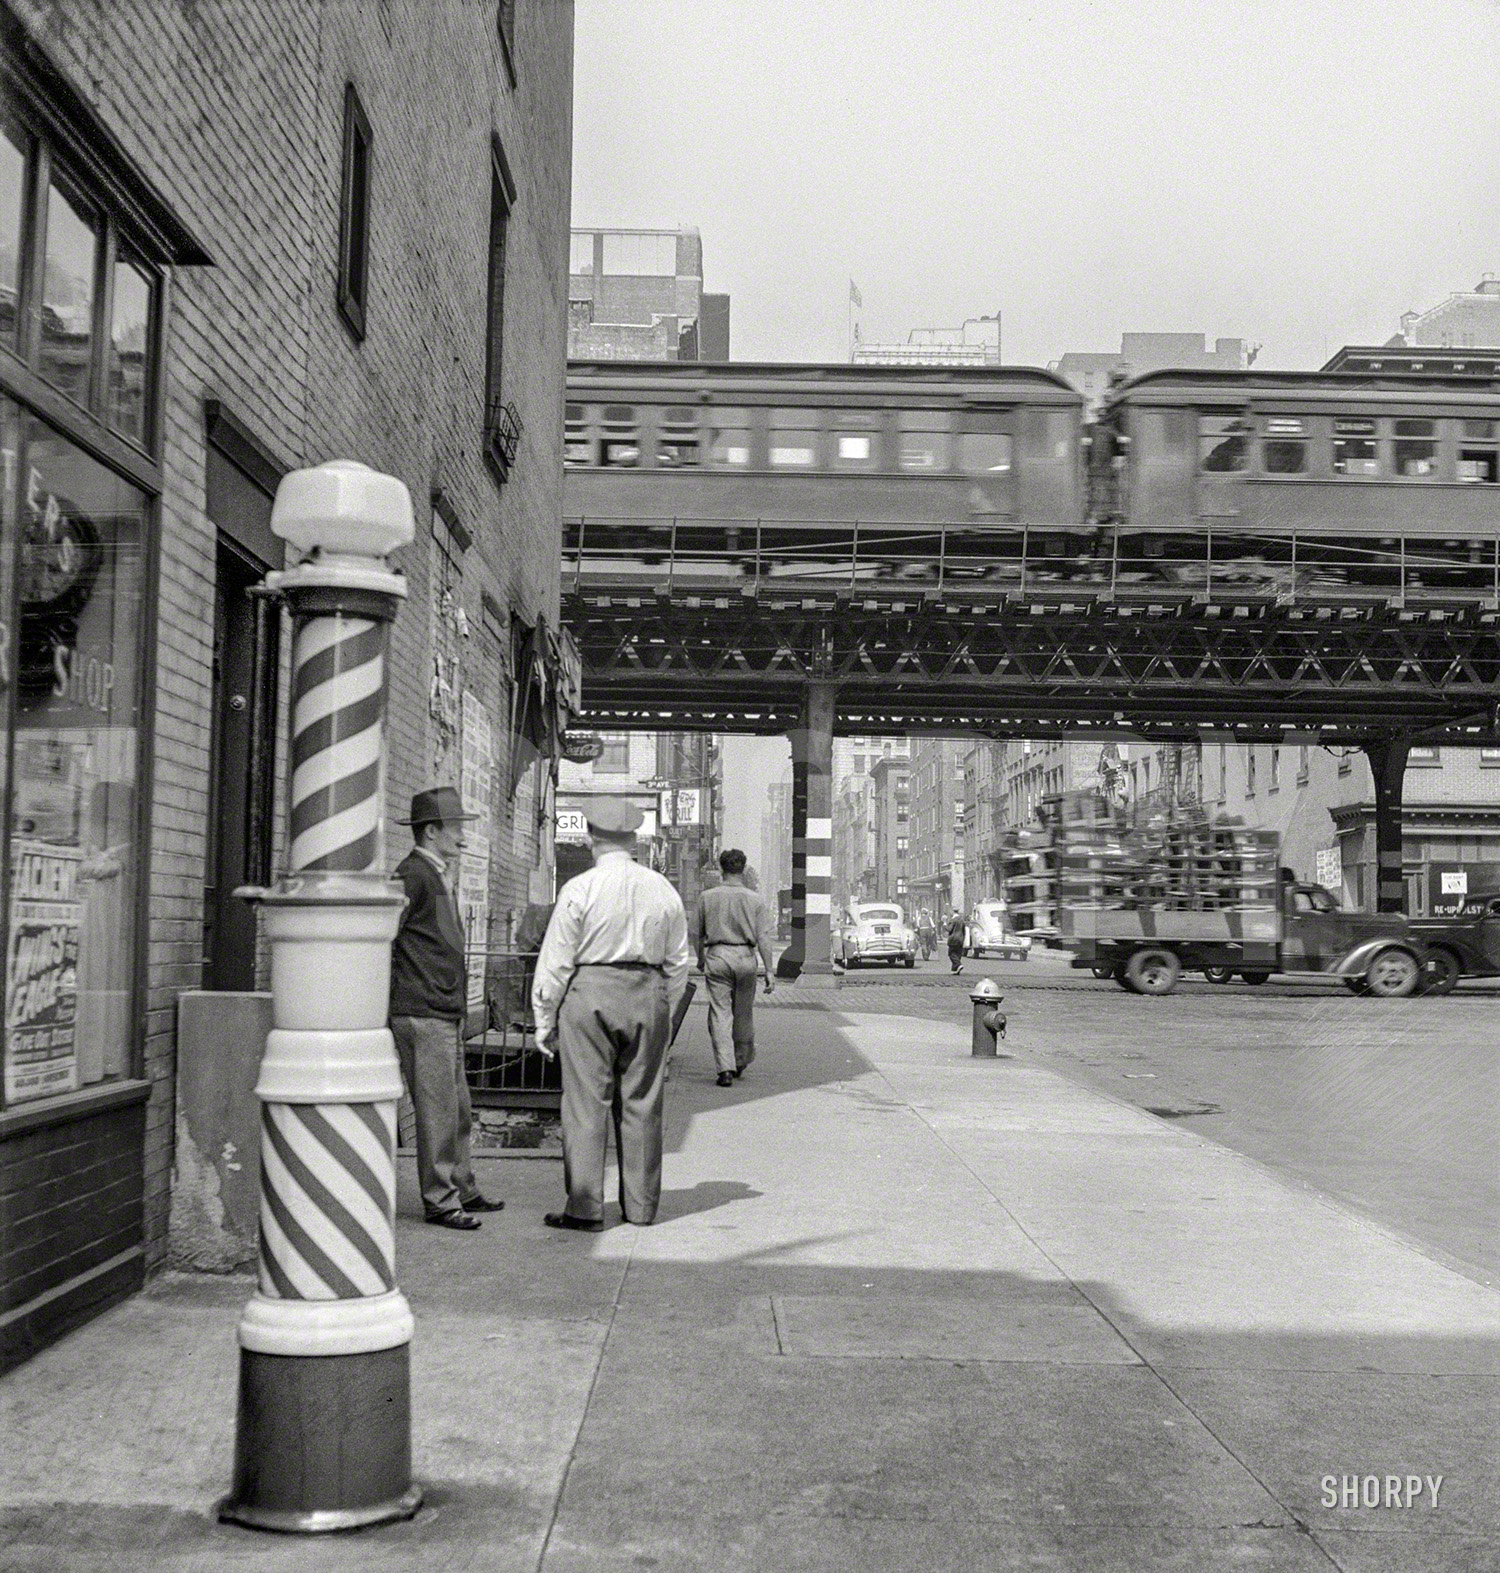 September 1942. "New York, New York. Looking west from the 17th Street station at the Third Avenue elevated railway as a train leaves on the local track." Photo by Marjory Collins for the Office of War Information. View full size.